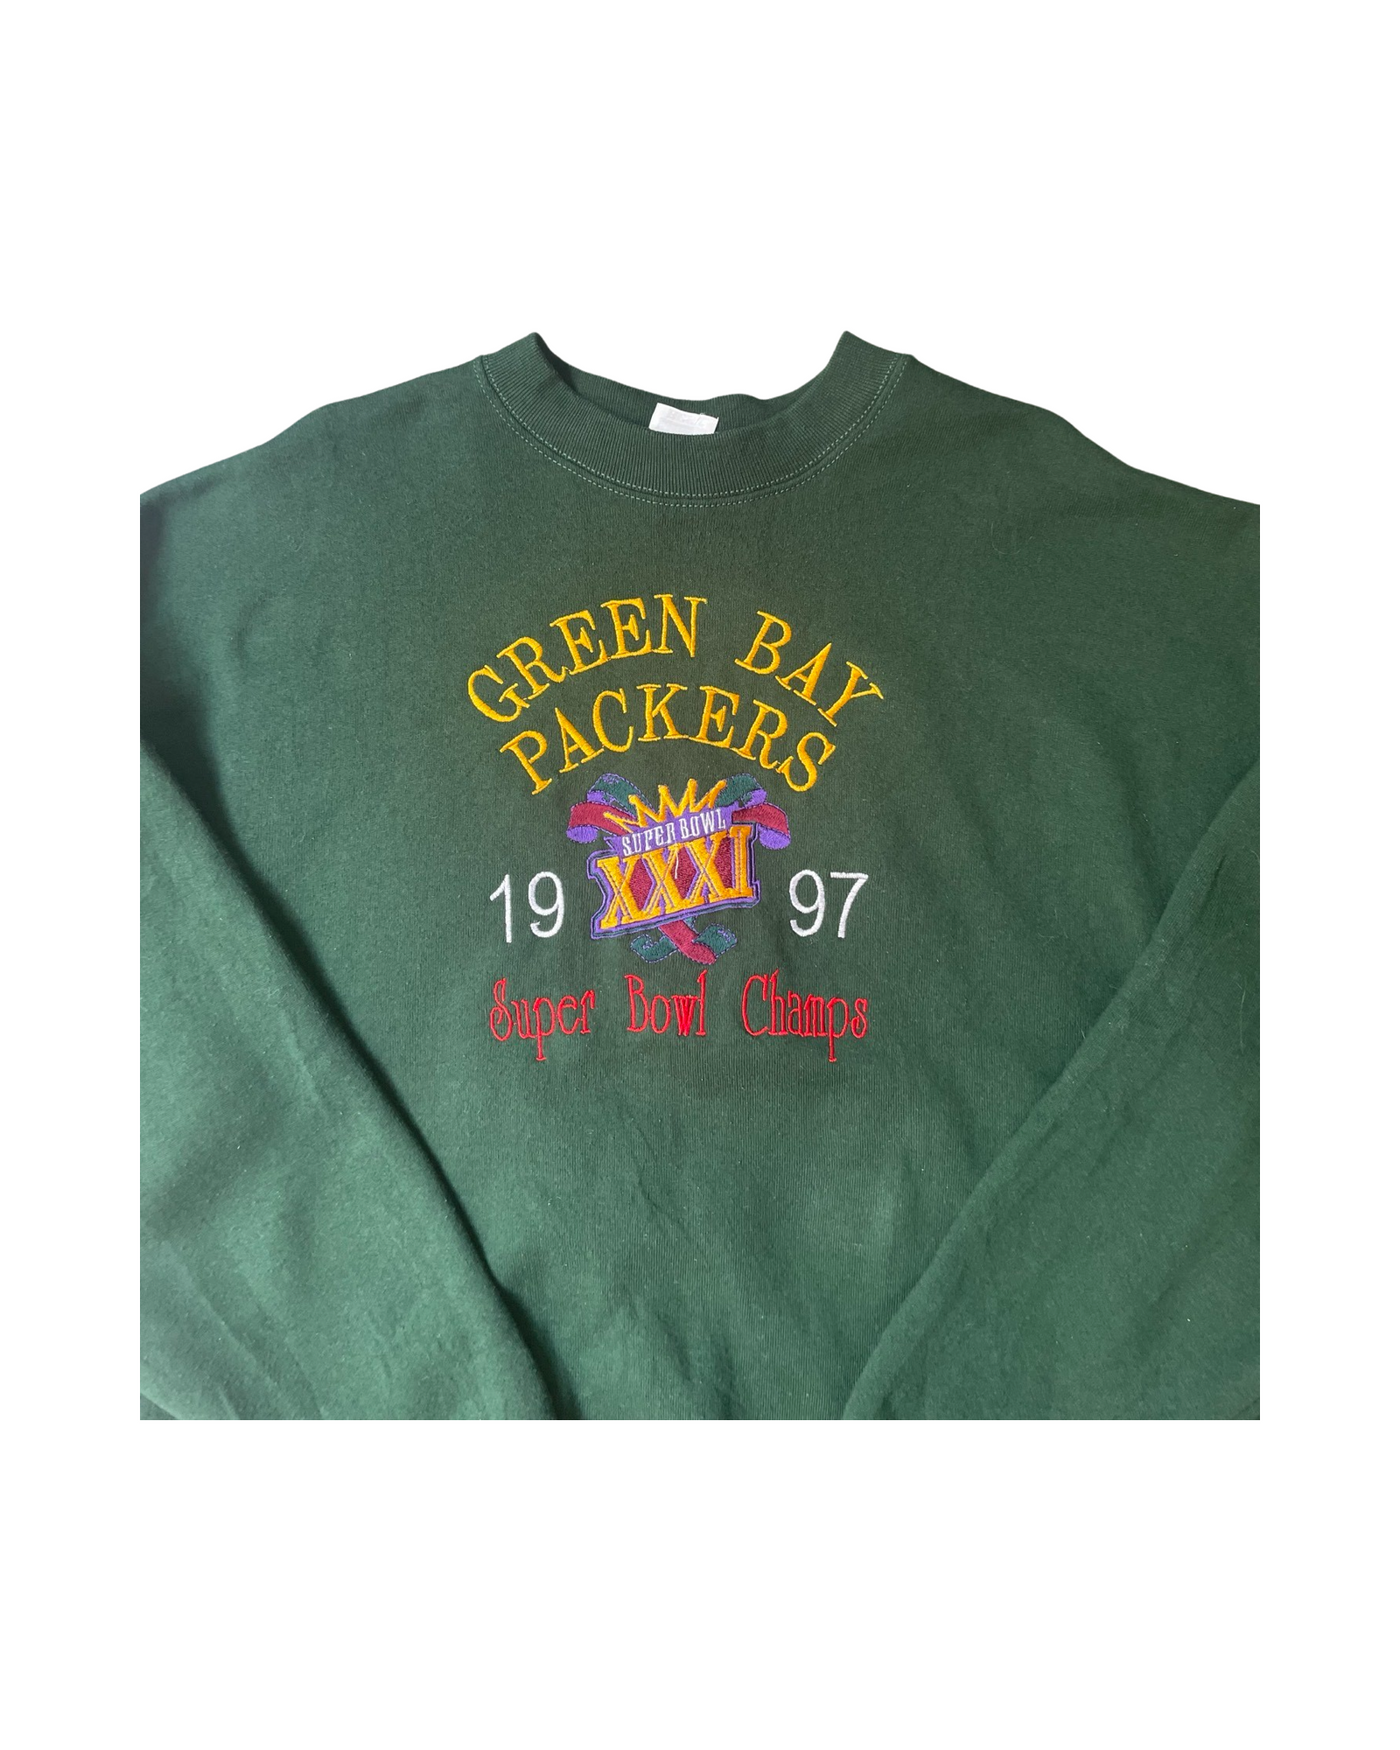 Vintage Green Bay Packers 1997 Crew Neck Jumper Size XL